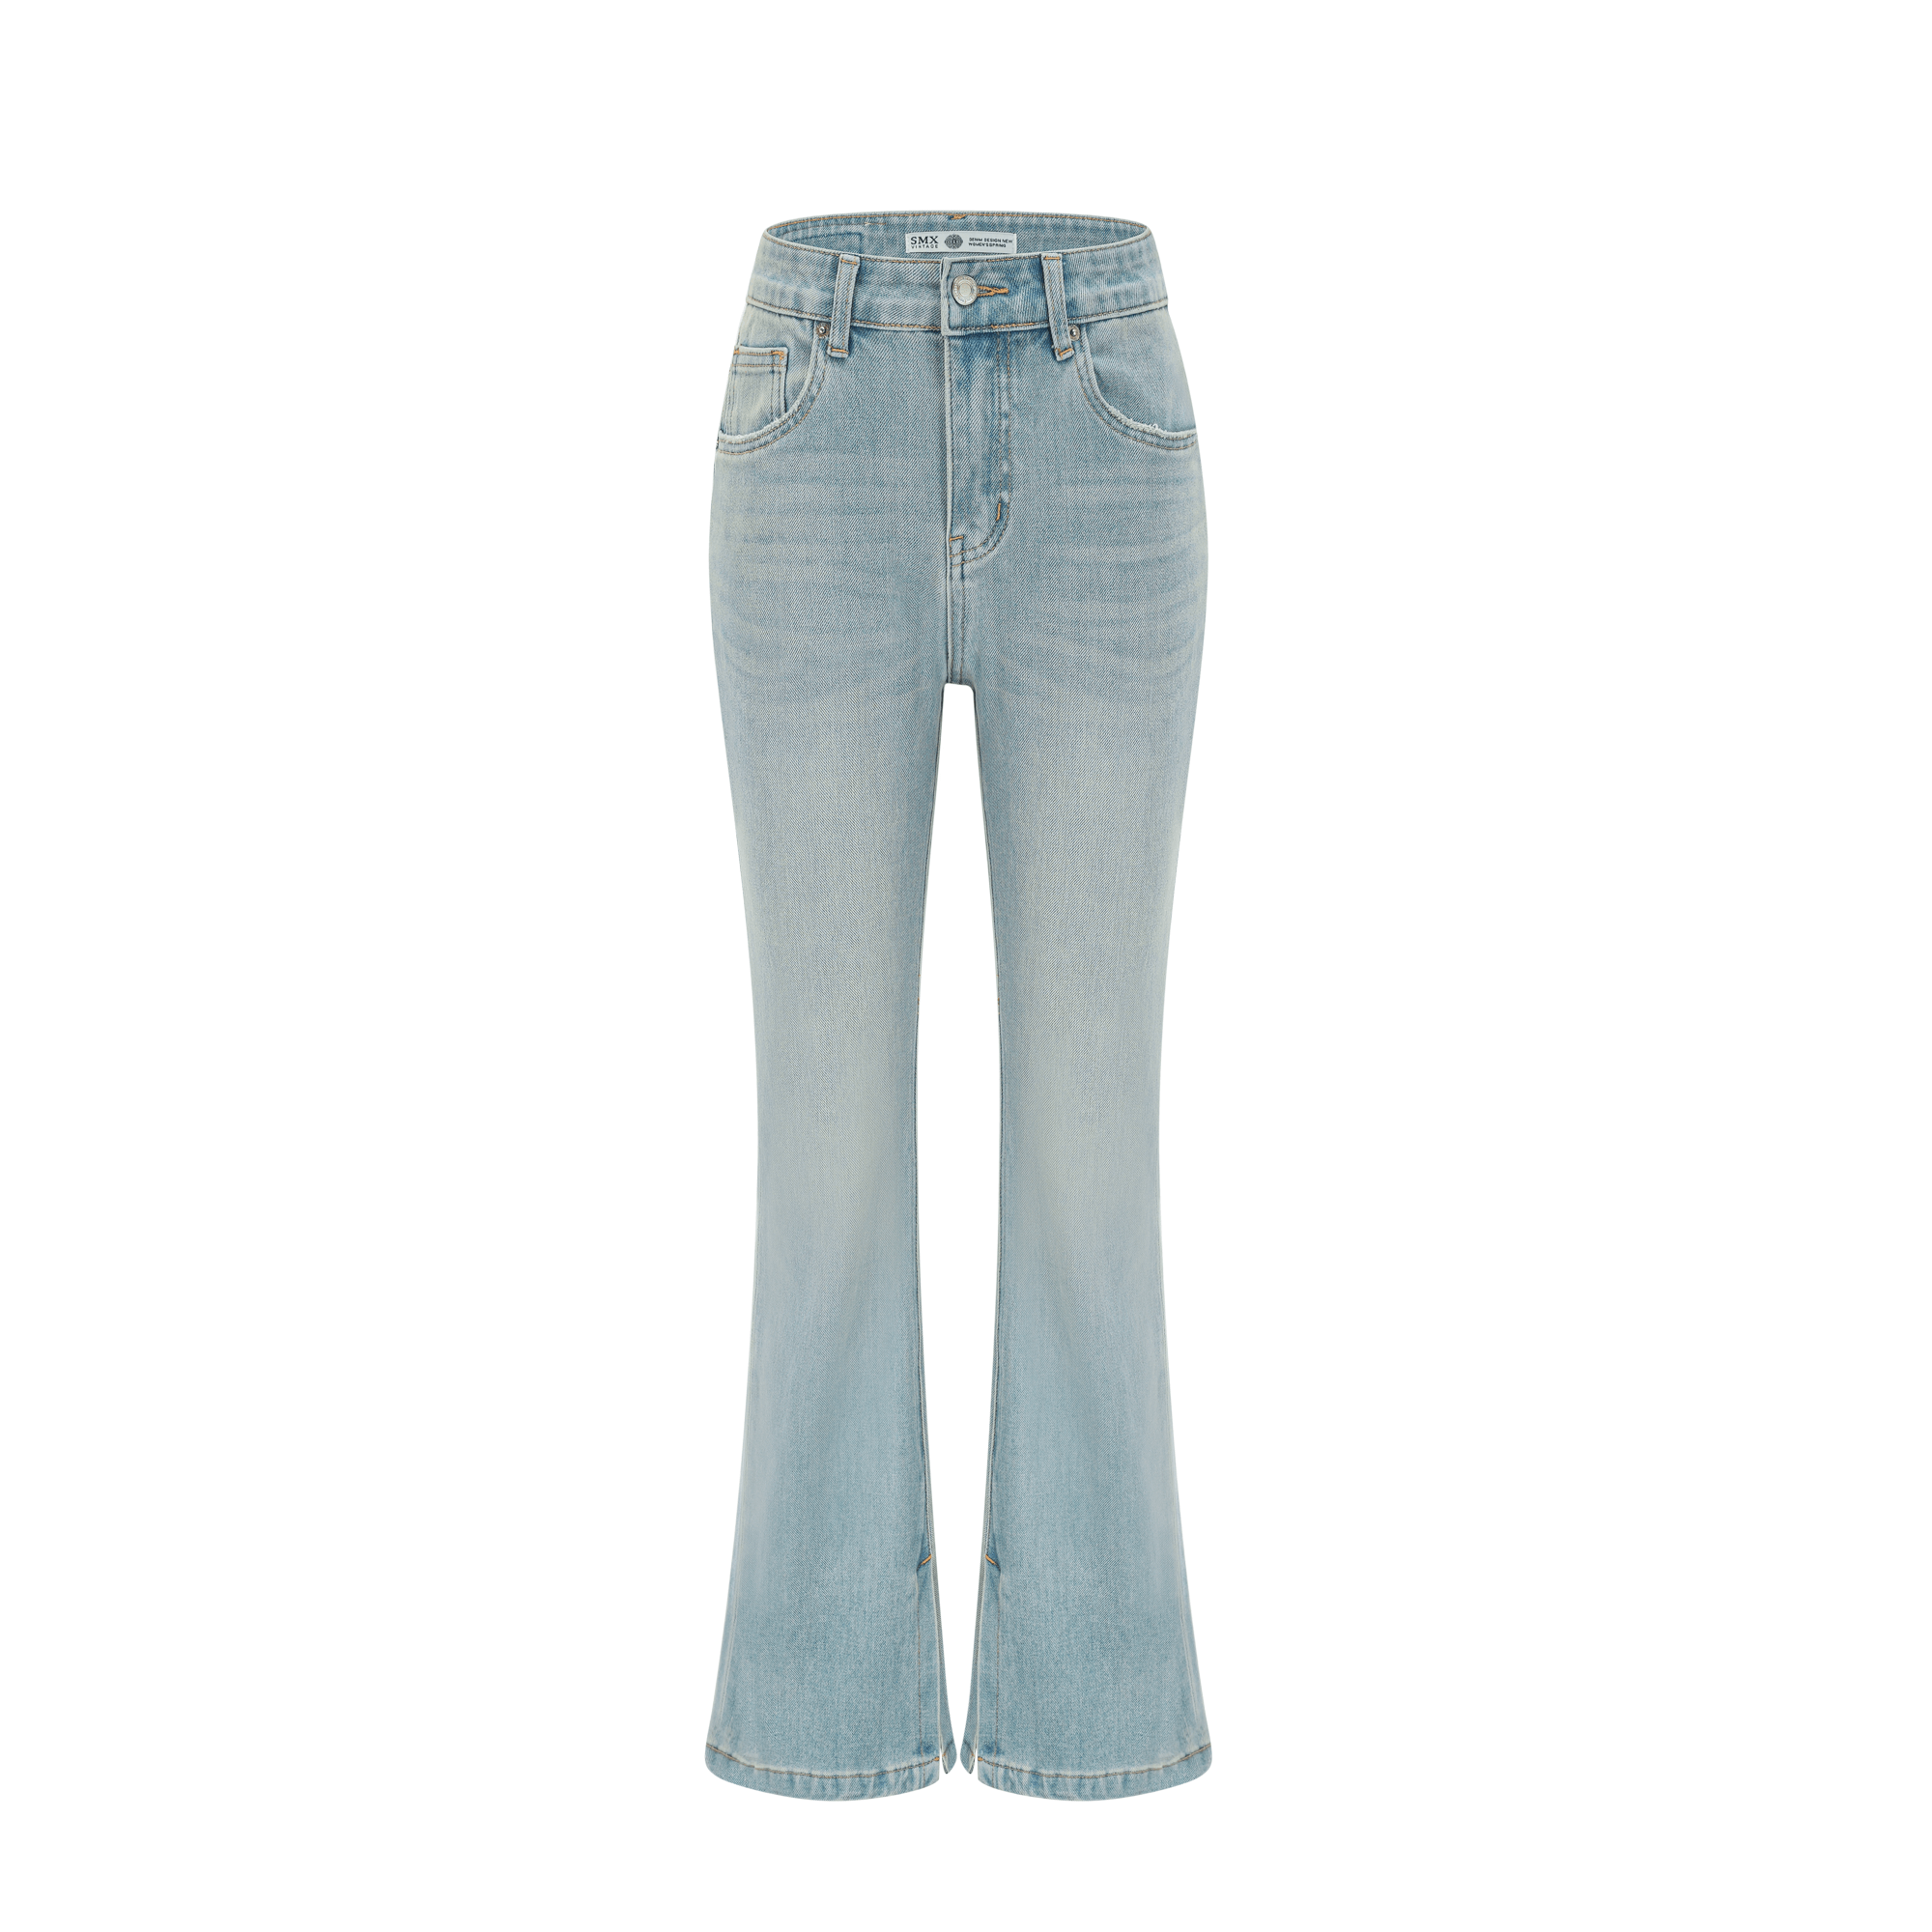 Dabney fitted jeans - Miss Rosier - Women's Online Boutique